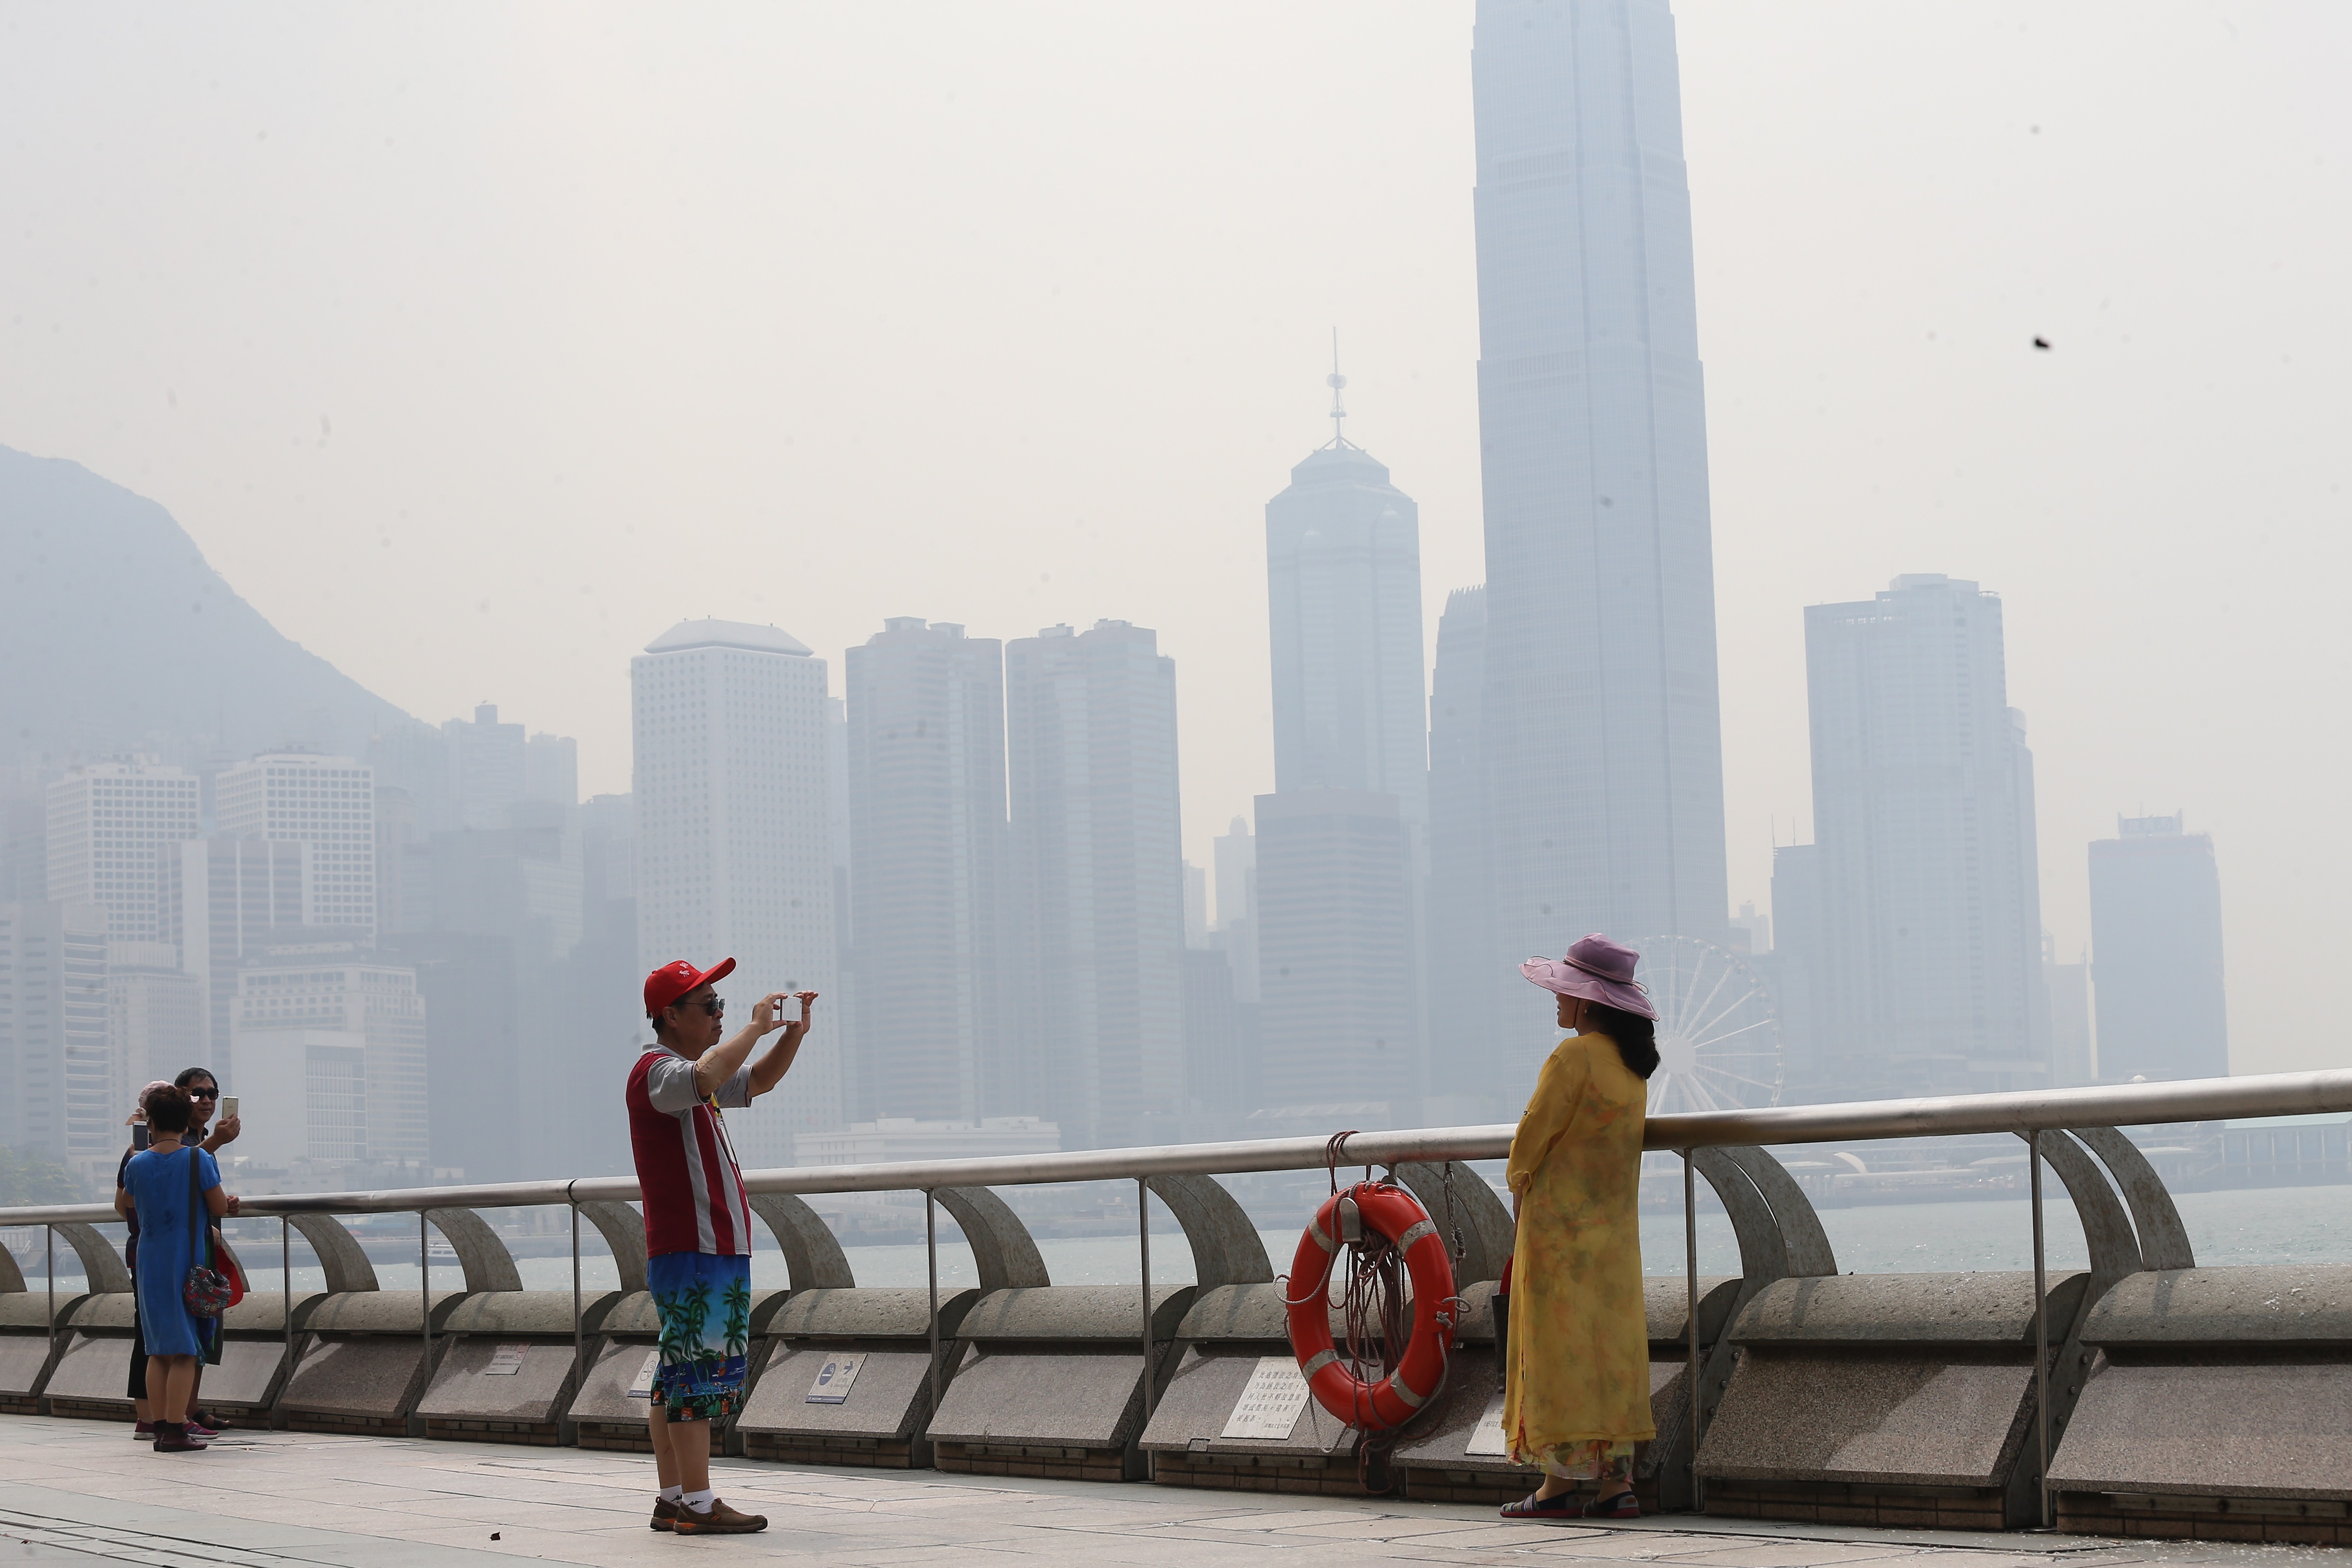 Tourists take pictures in Tsim Sha Tsui amid hazy conditions. Photo: Dickson Lee